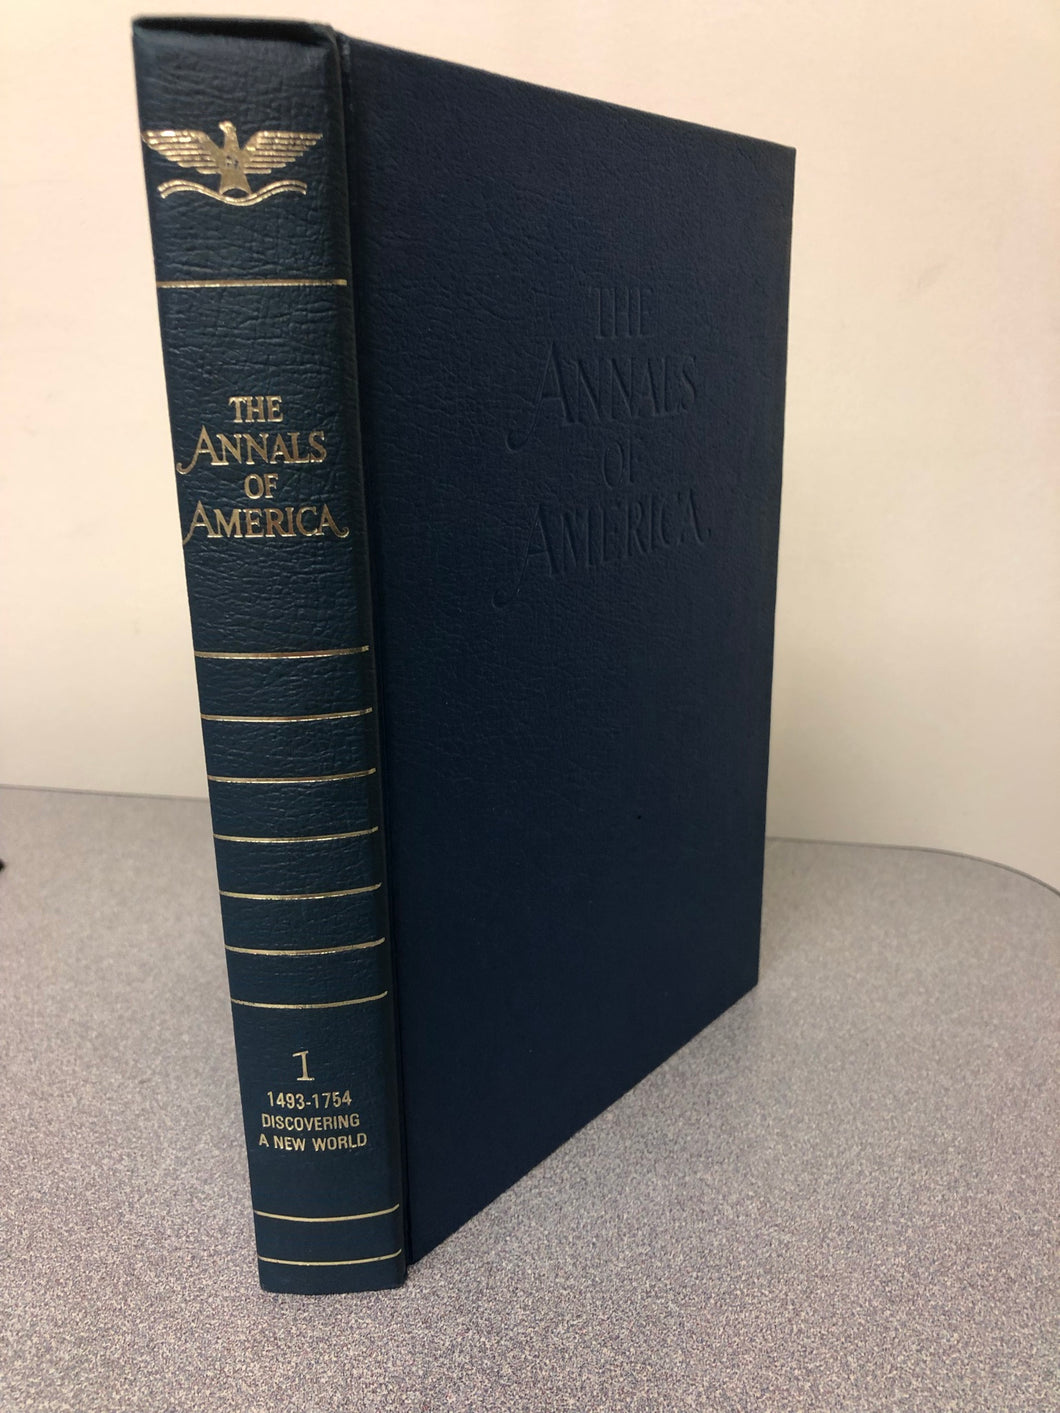 The Annals of America, Volumes 1 - 19, 1968, published by Encyclopaedia Britannica, Inc. SS